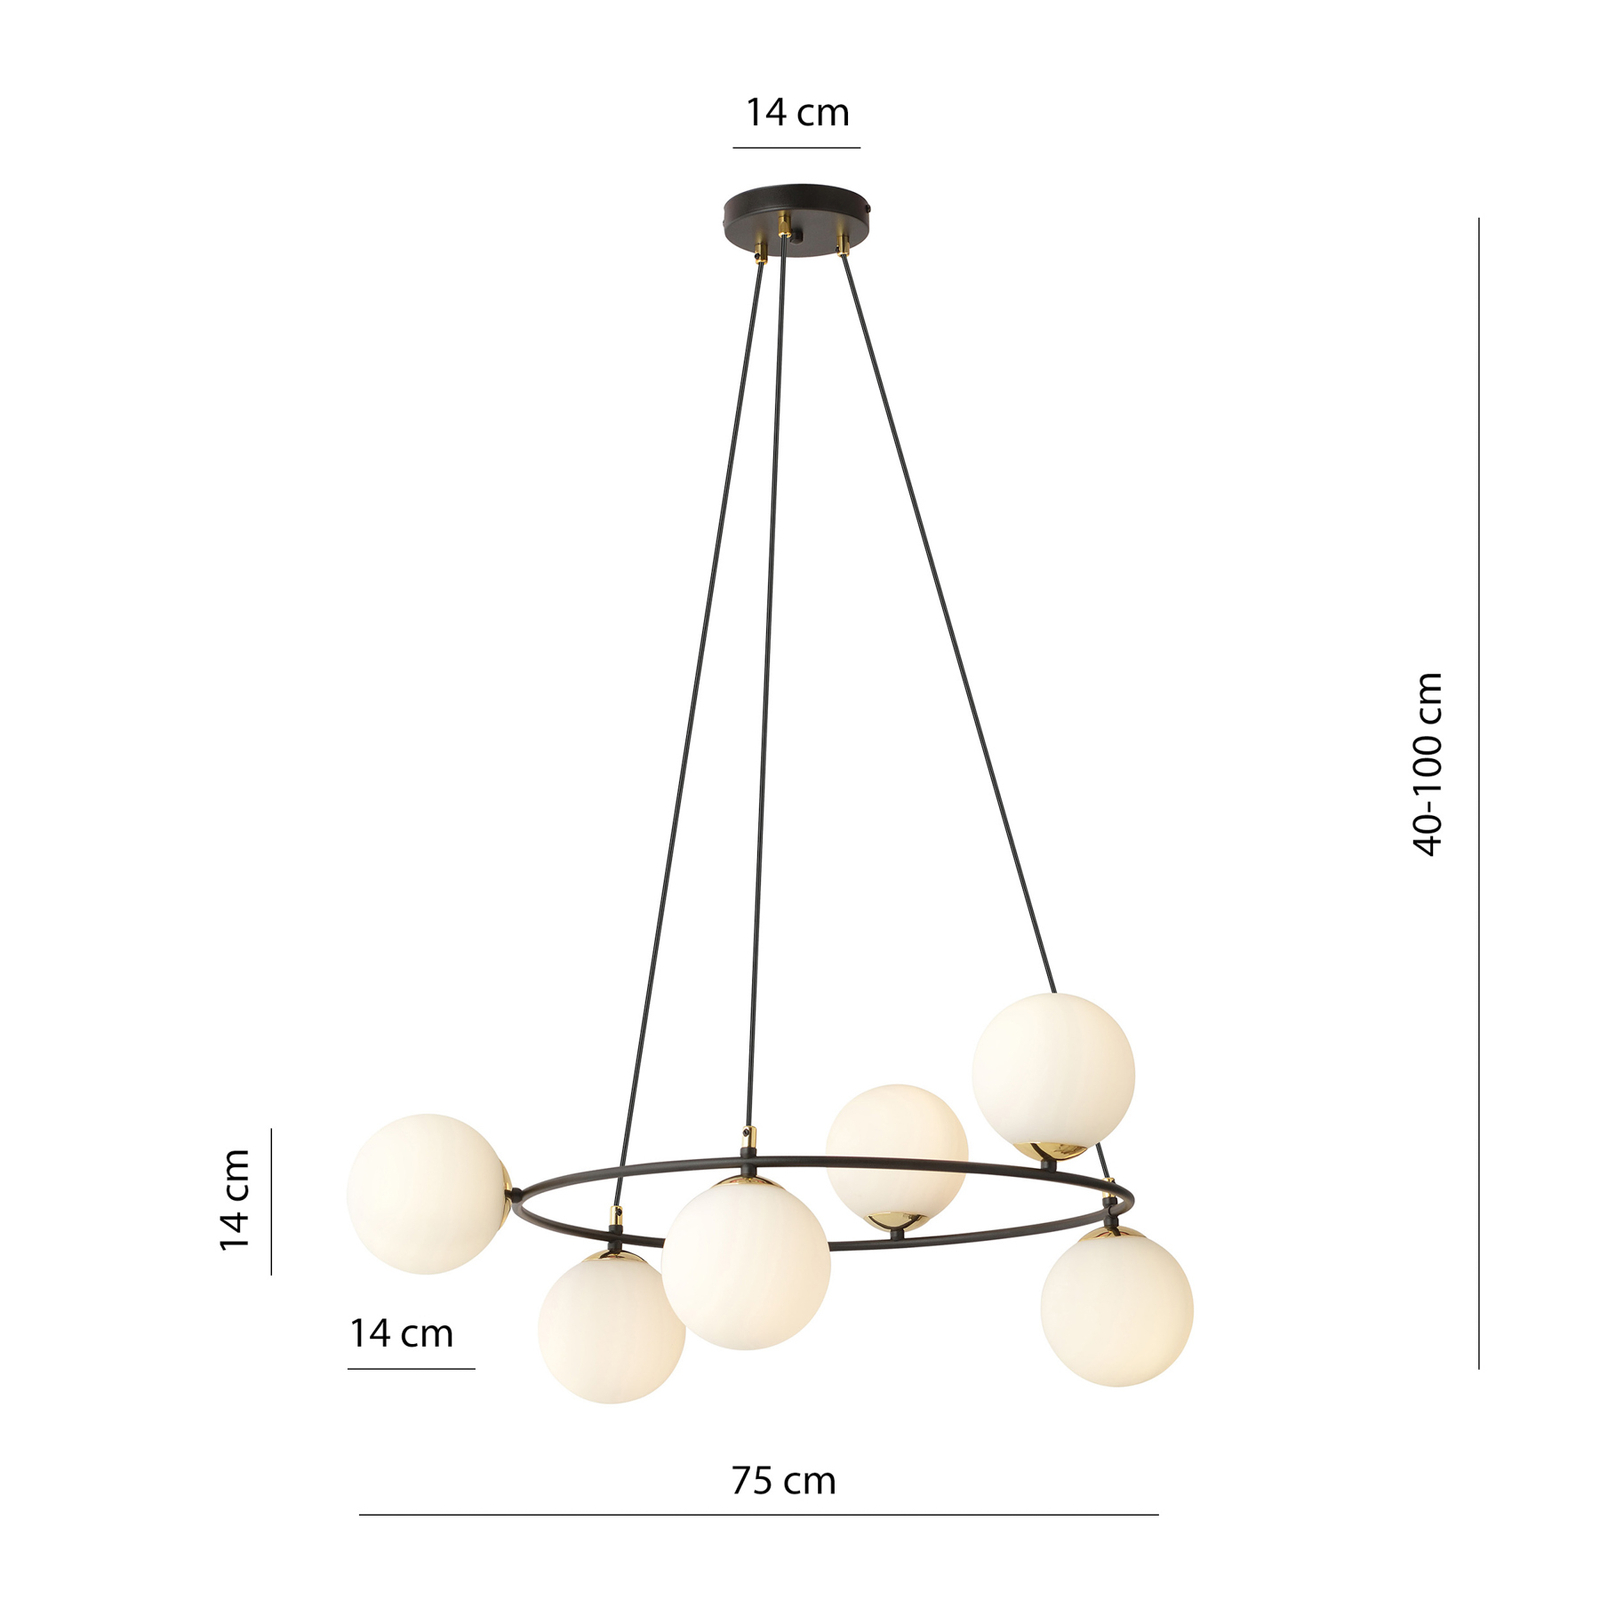 Glassy hanglamp 6-lamps, rond, opaal glas